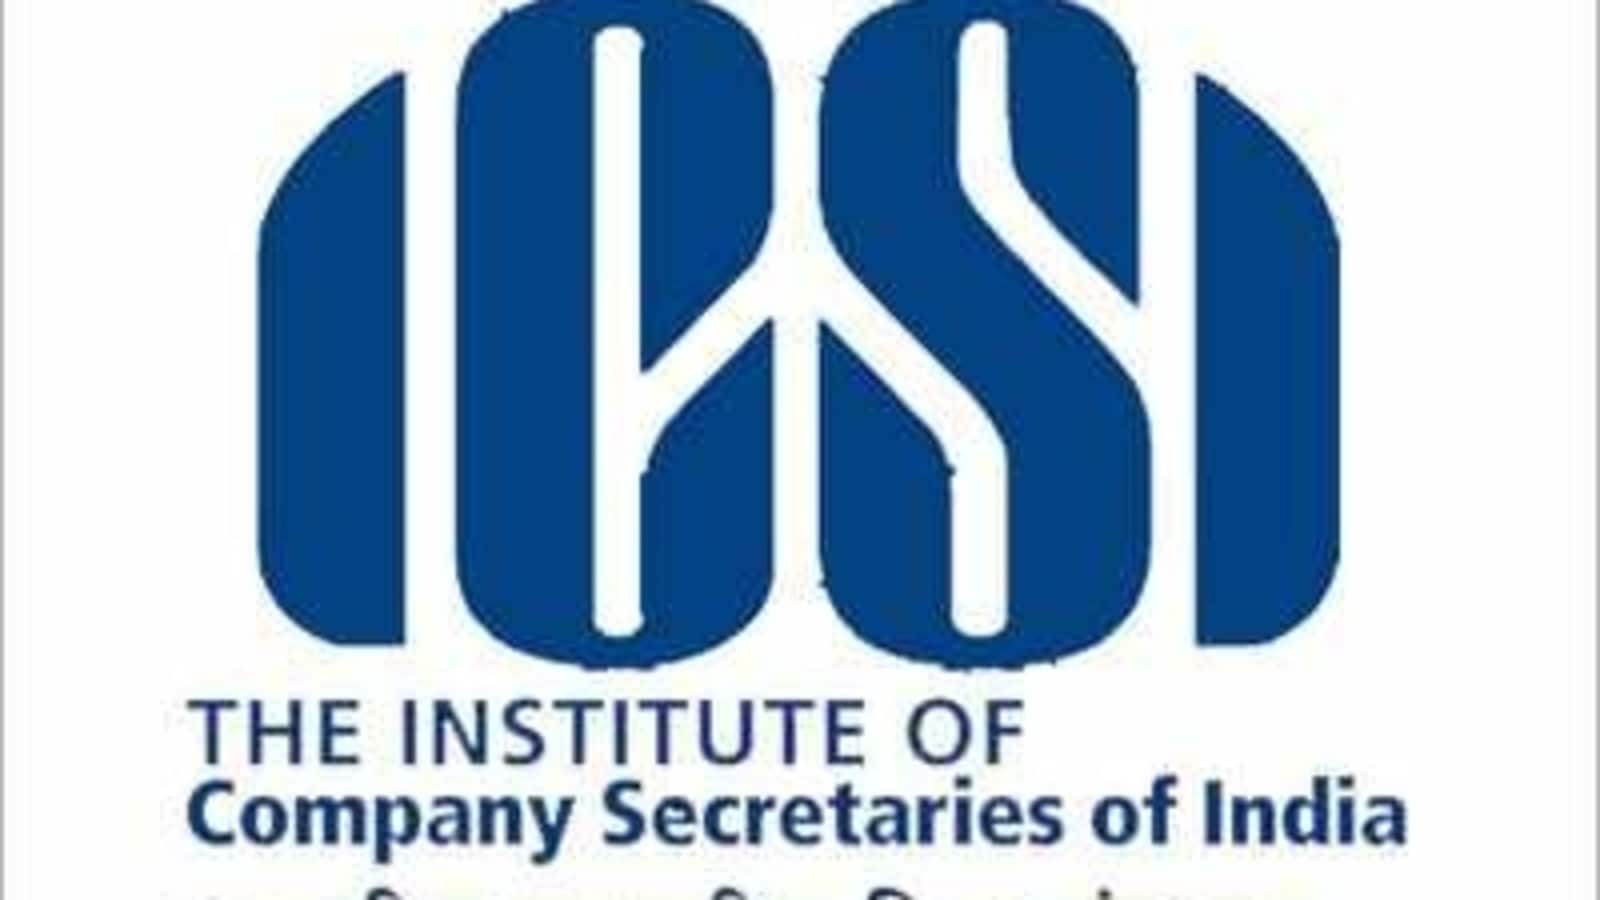 ICSI CS December result released at icsi.edu: Know how to check, link here